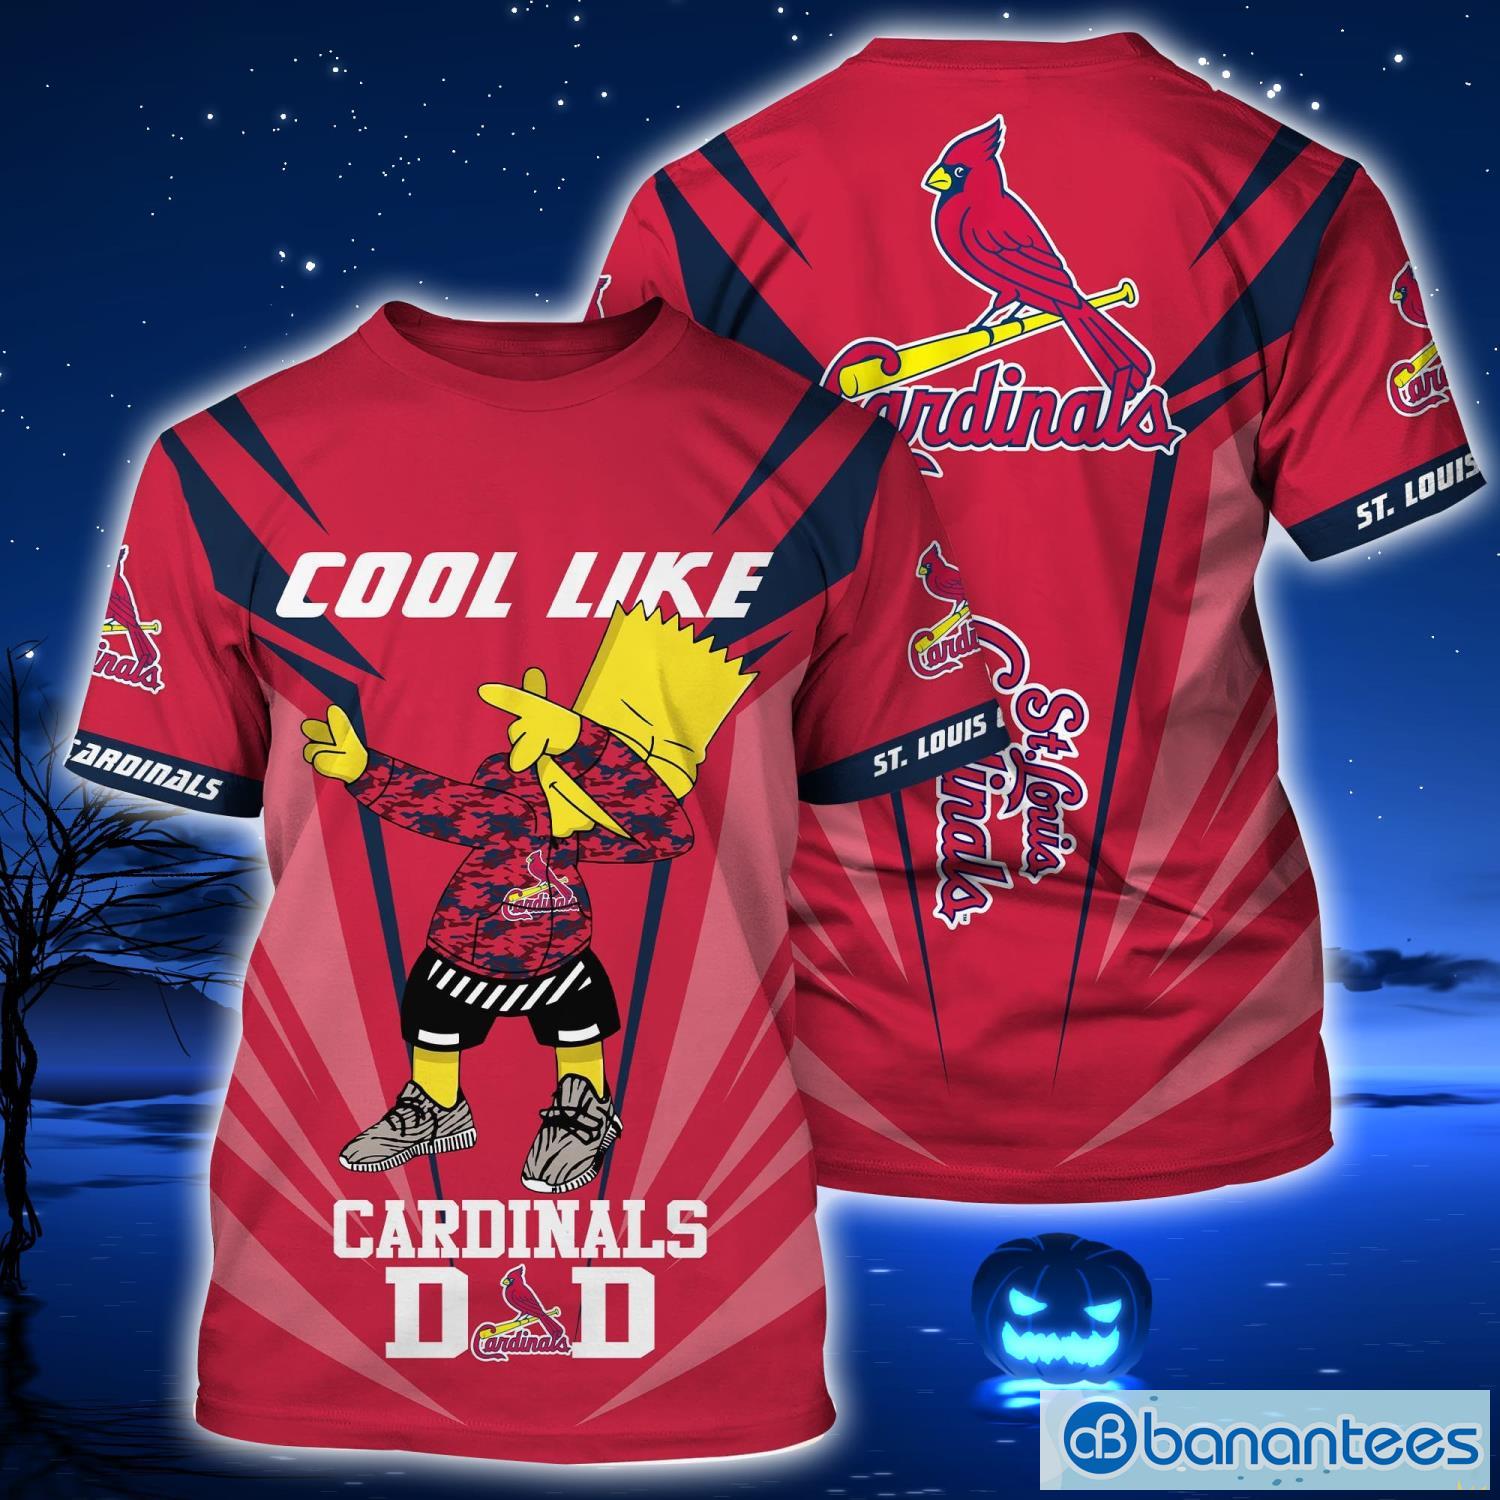 St Louis Cardinals Tshirts 3D Thrilling St Louis Cardinals Gifts For Men -  Personalized Gifts: Family, Sports, Occasions, Trending